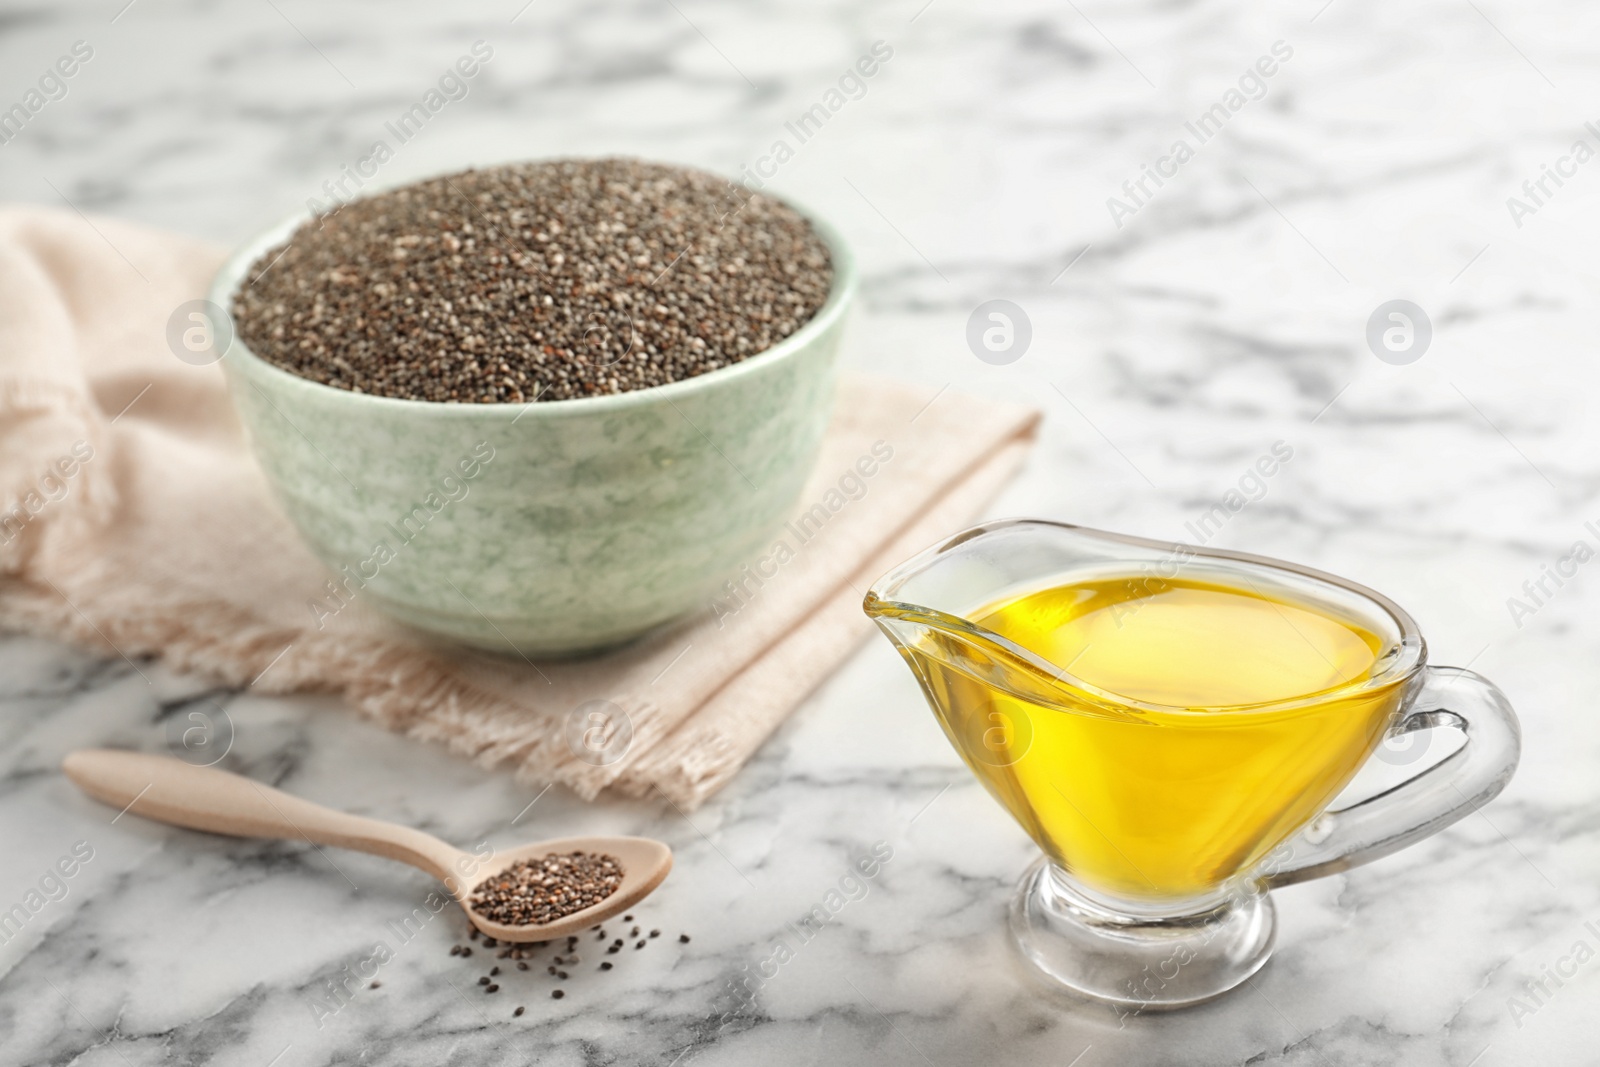 Photo of Sauce boat with chia oil, spoon and bowl of seeds on marble background